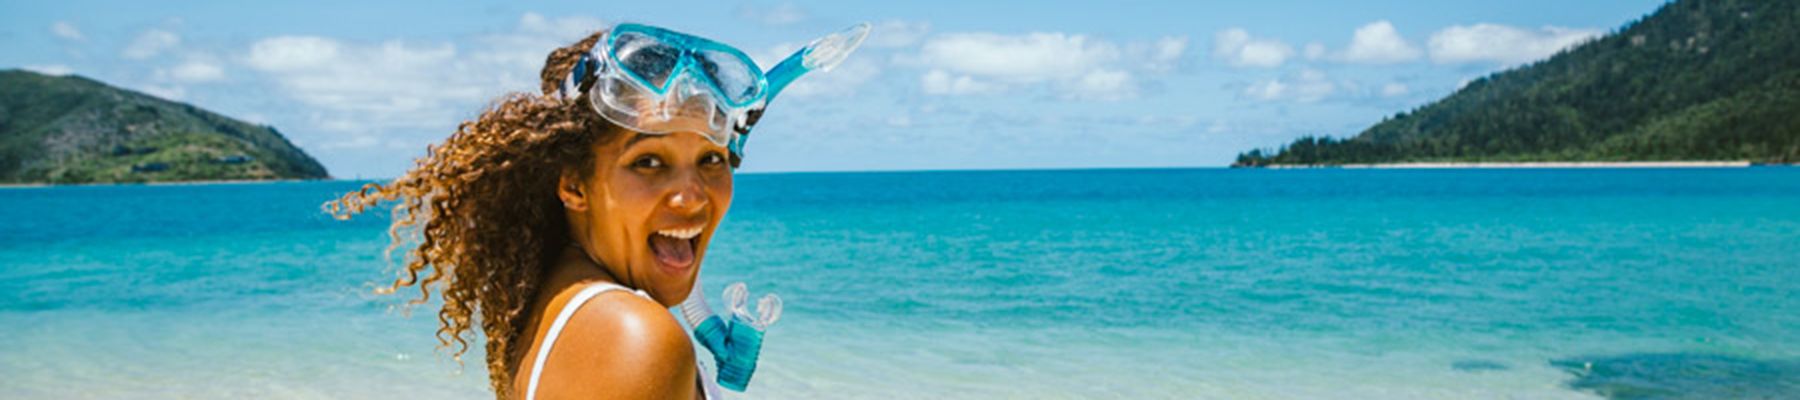 Girl with snorkel in the reef